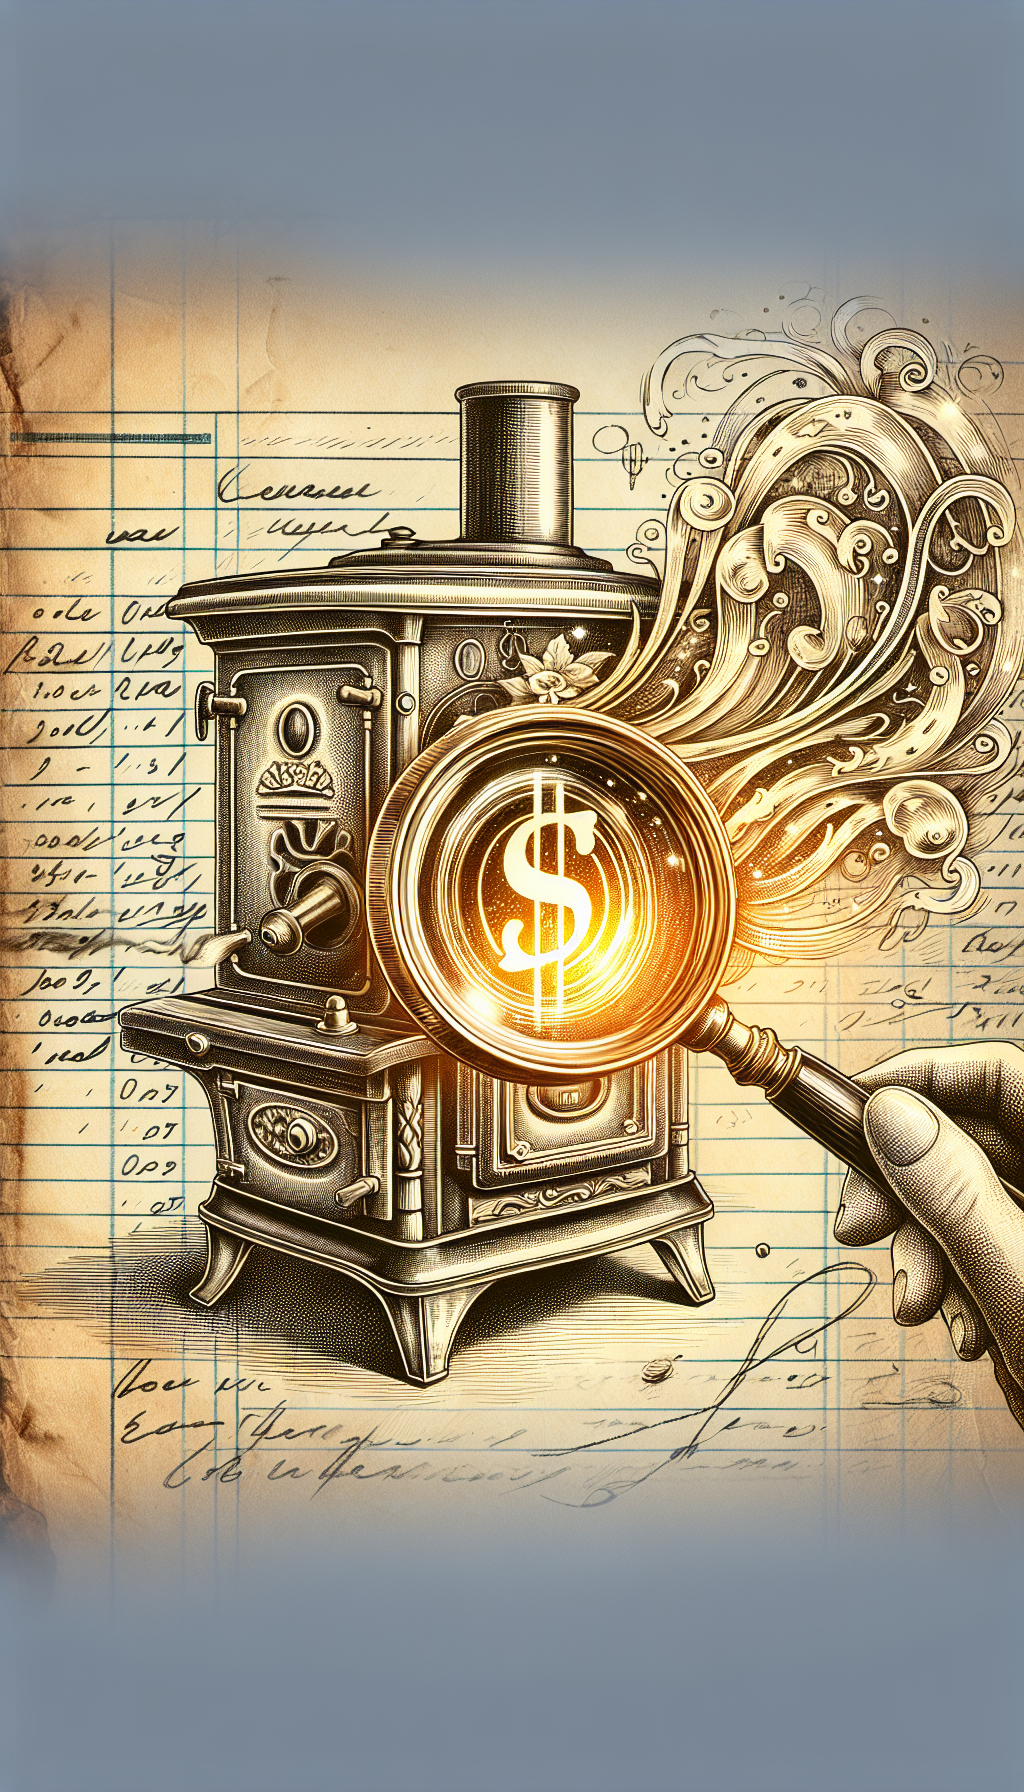 An intricately detailed pen-and-ink drawing of a magnifying glass poised over an ornate, vintage stove, with age marks and a faded maker's mark visible. The stove stands atop a transparent ledger, with scribbled notes and dollar signs swirling around, gradually transitioning into a glowing golden hue, symbolizing the ascent in value as the stove's age and rarity are revealed.